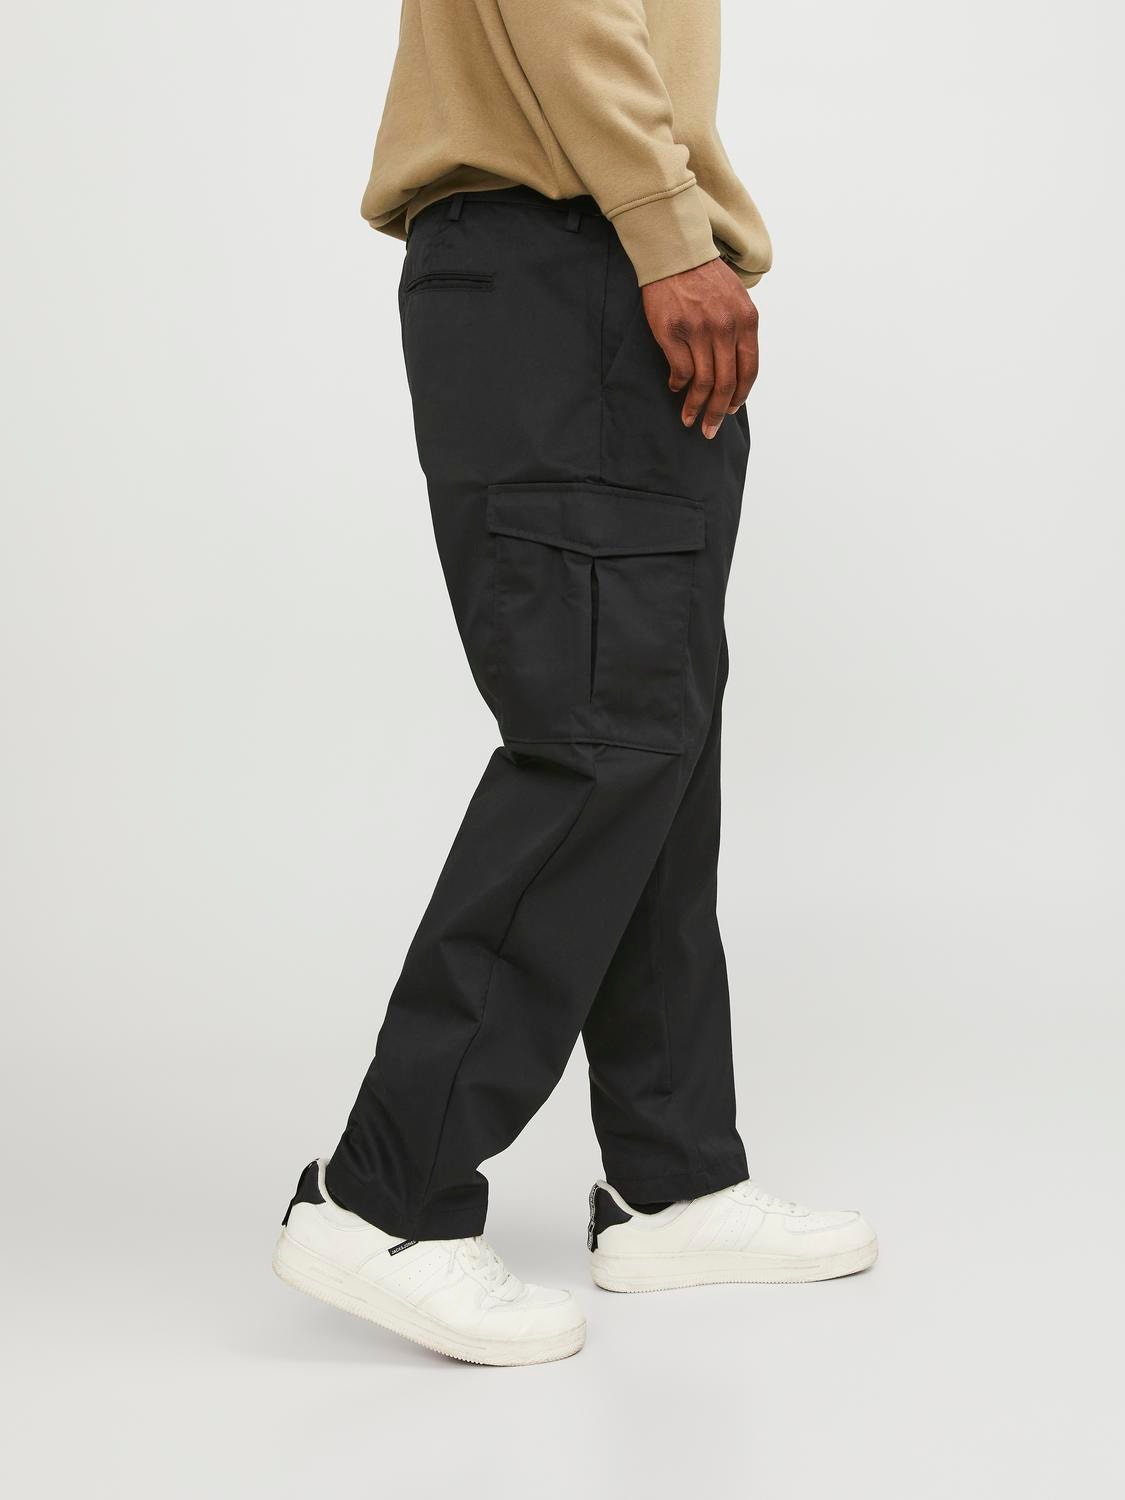 Plus Size Wide Fit Cargo trousers, Black